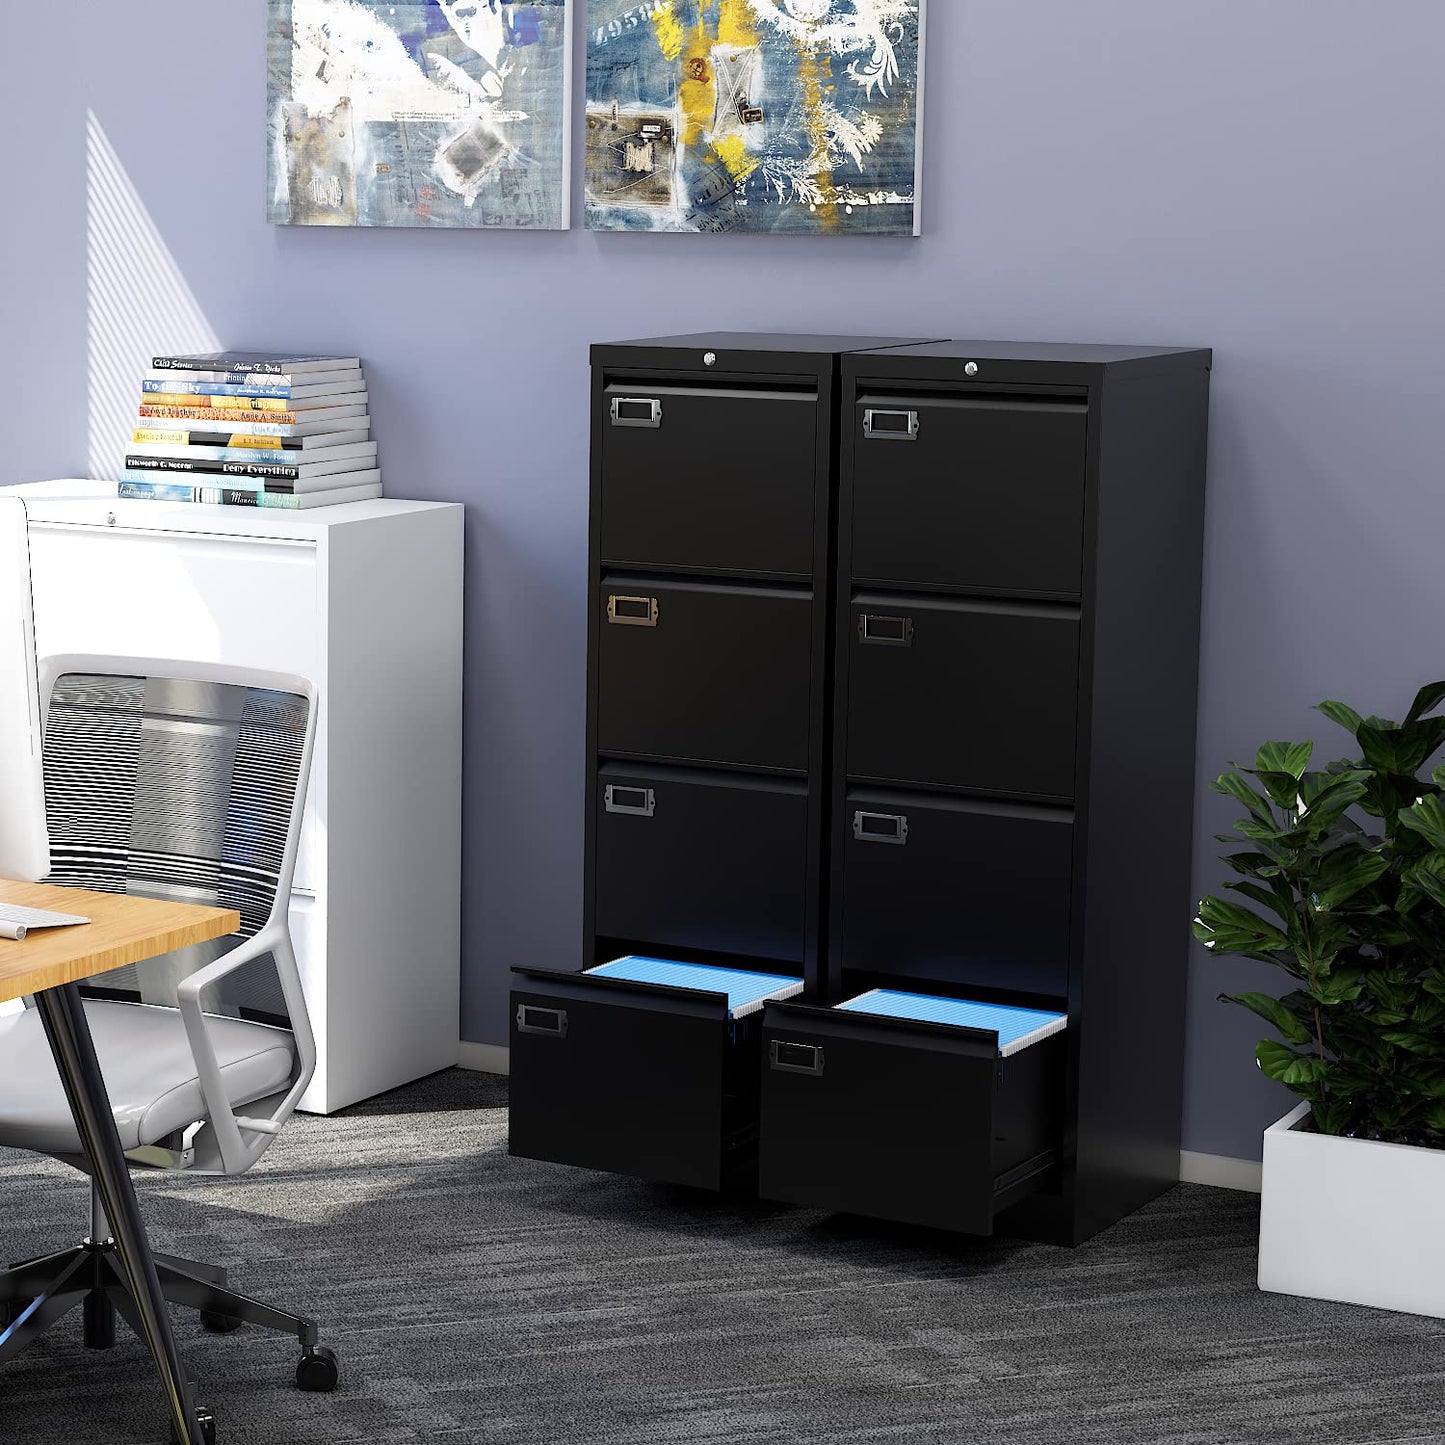 Fesbos 4 Drawers Vertical File Cabinets - Lateral Filing Cabinets - Metal Steel Lockable Storage Cabinets for Home Office to Hanging Files Letter/Legal/F4/A4 Size